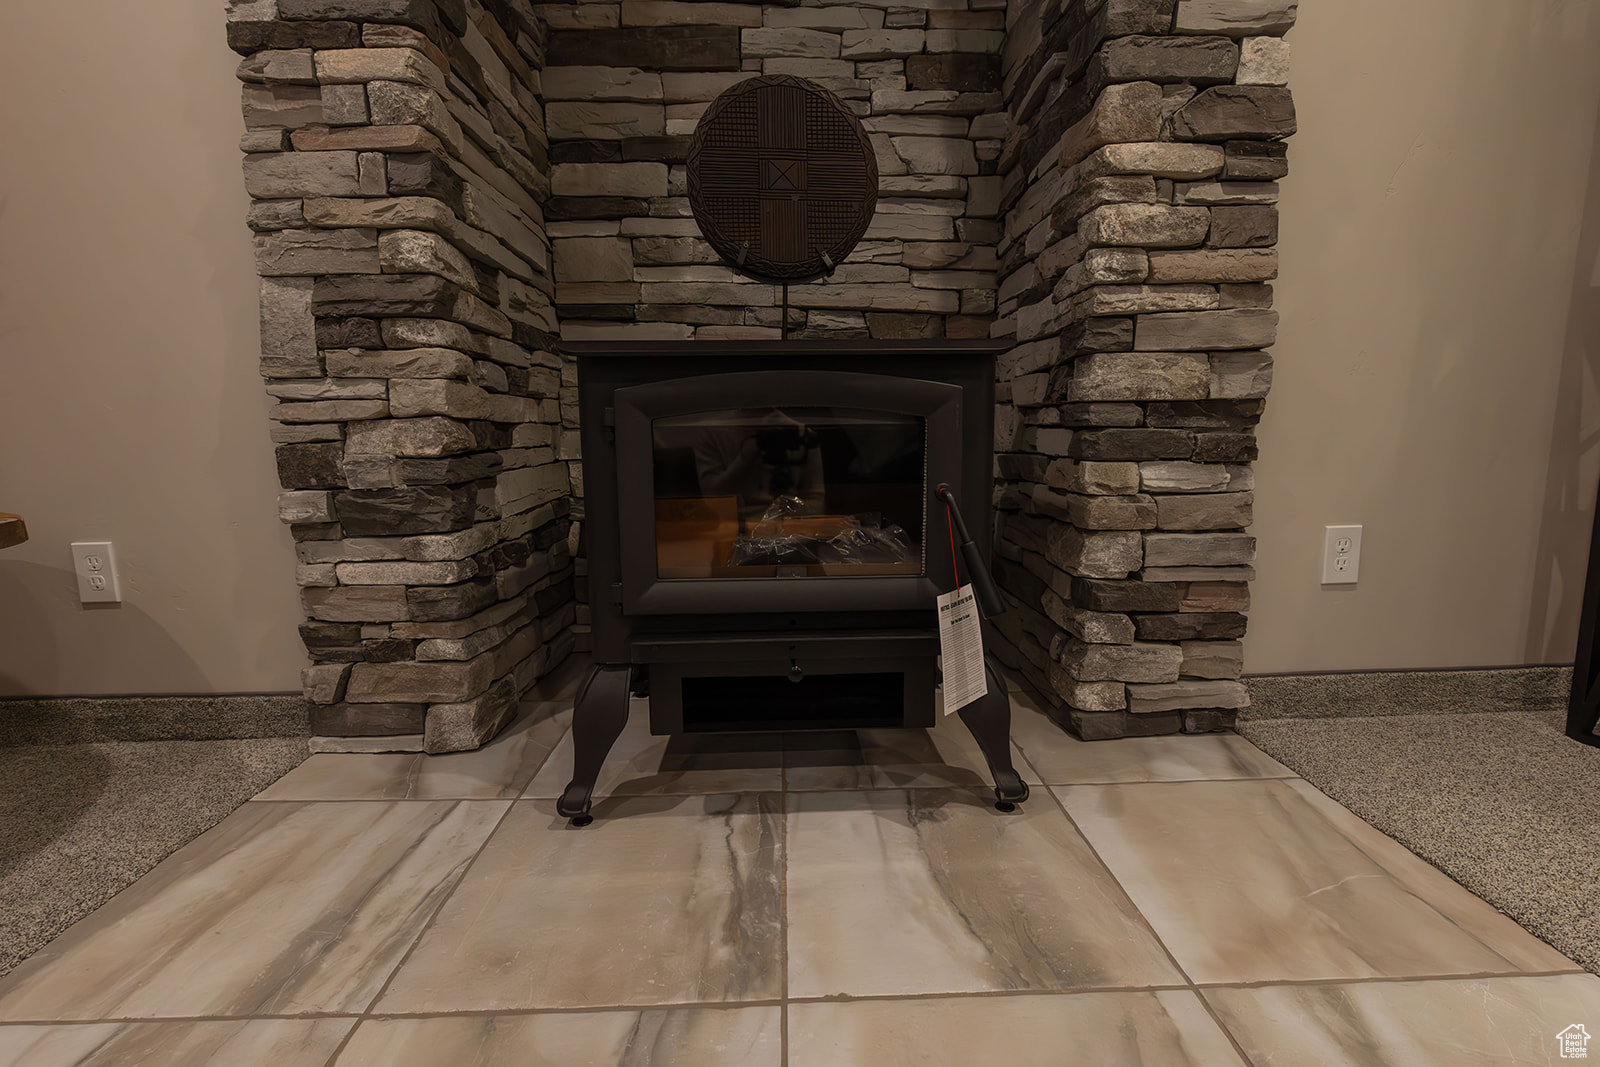 Room details with a stone fireplace and a wood stove